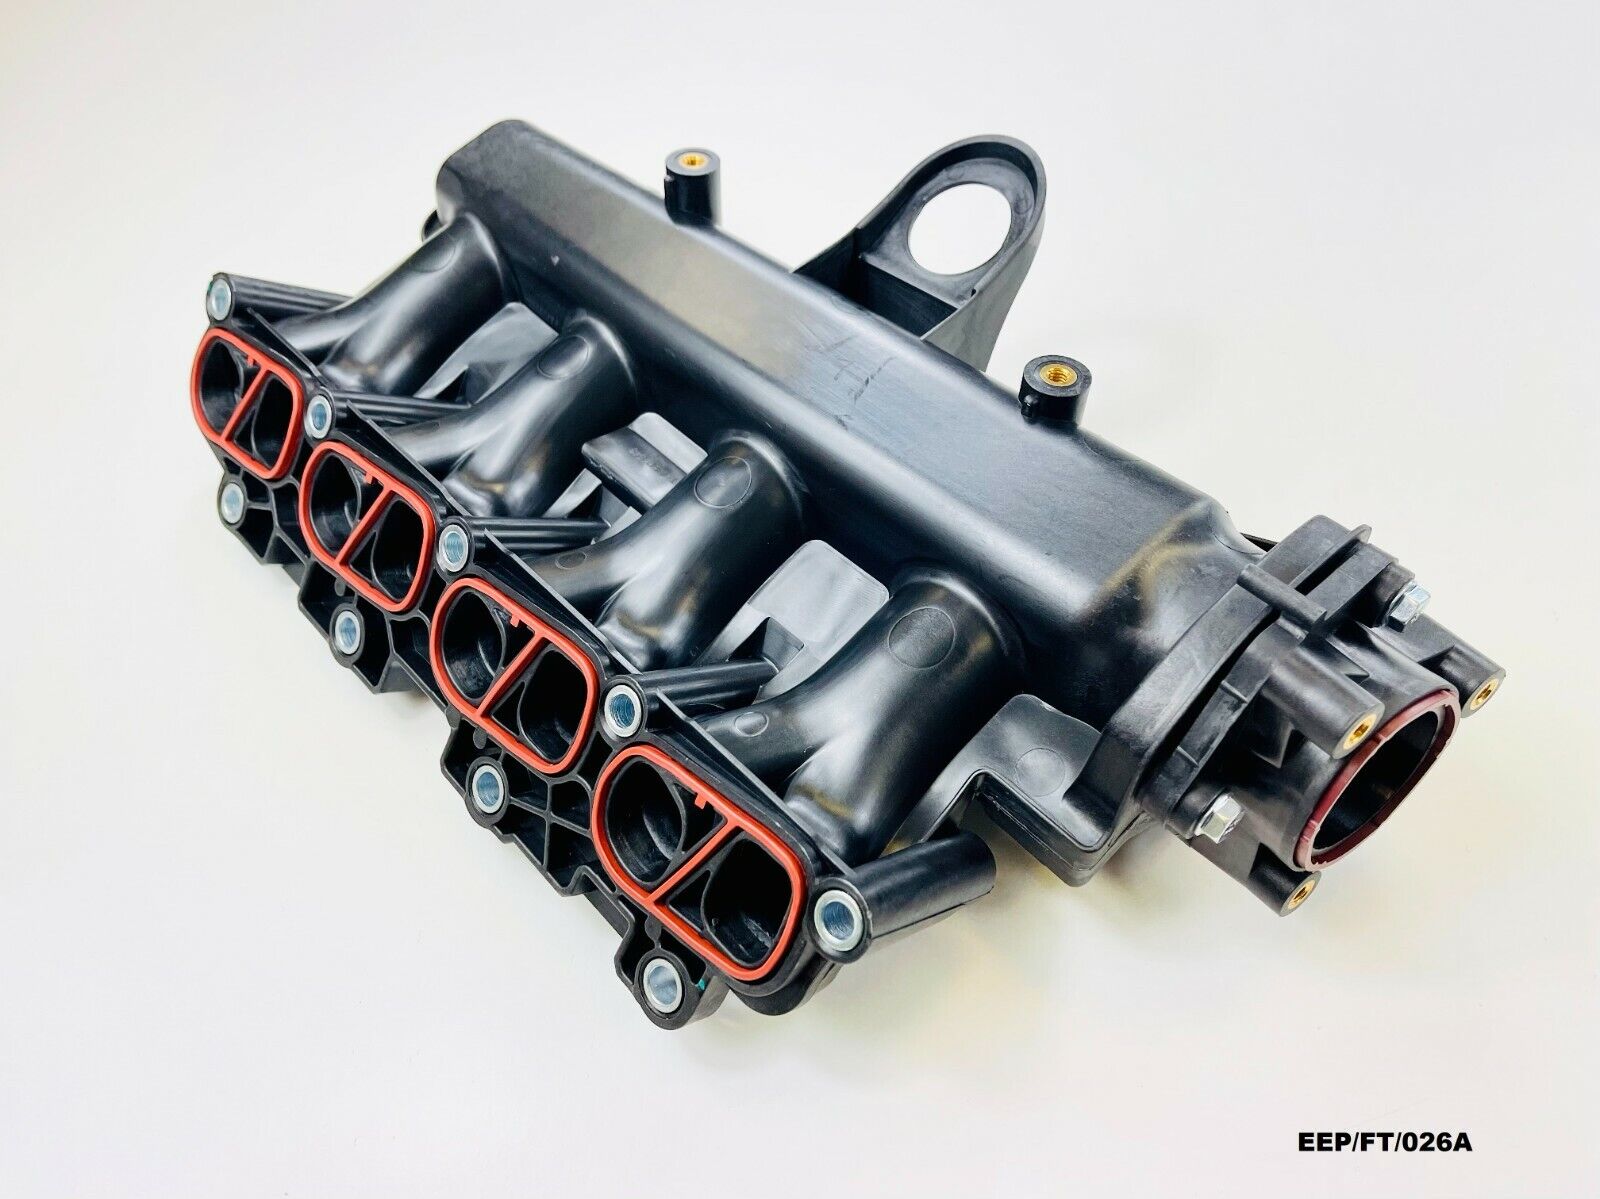 Intake Inlet Manifold for FIAT GRANDE PUNTO (199_) 1.3D/1.3JTD 2006+ EEP/FT/026A